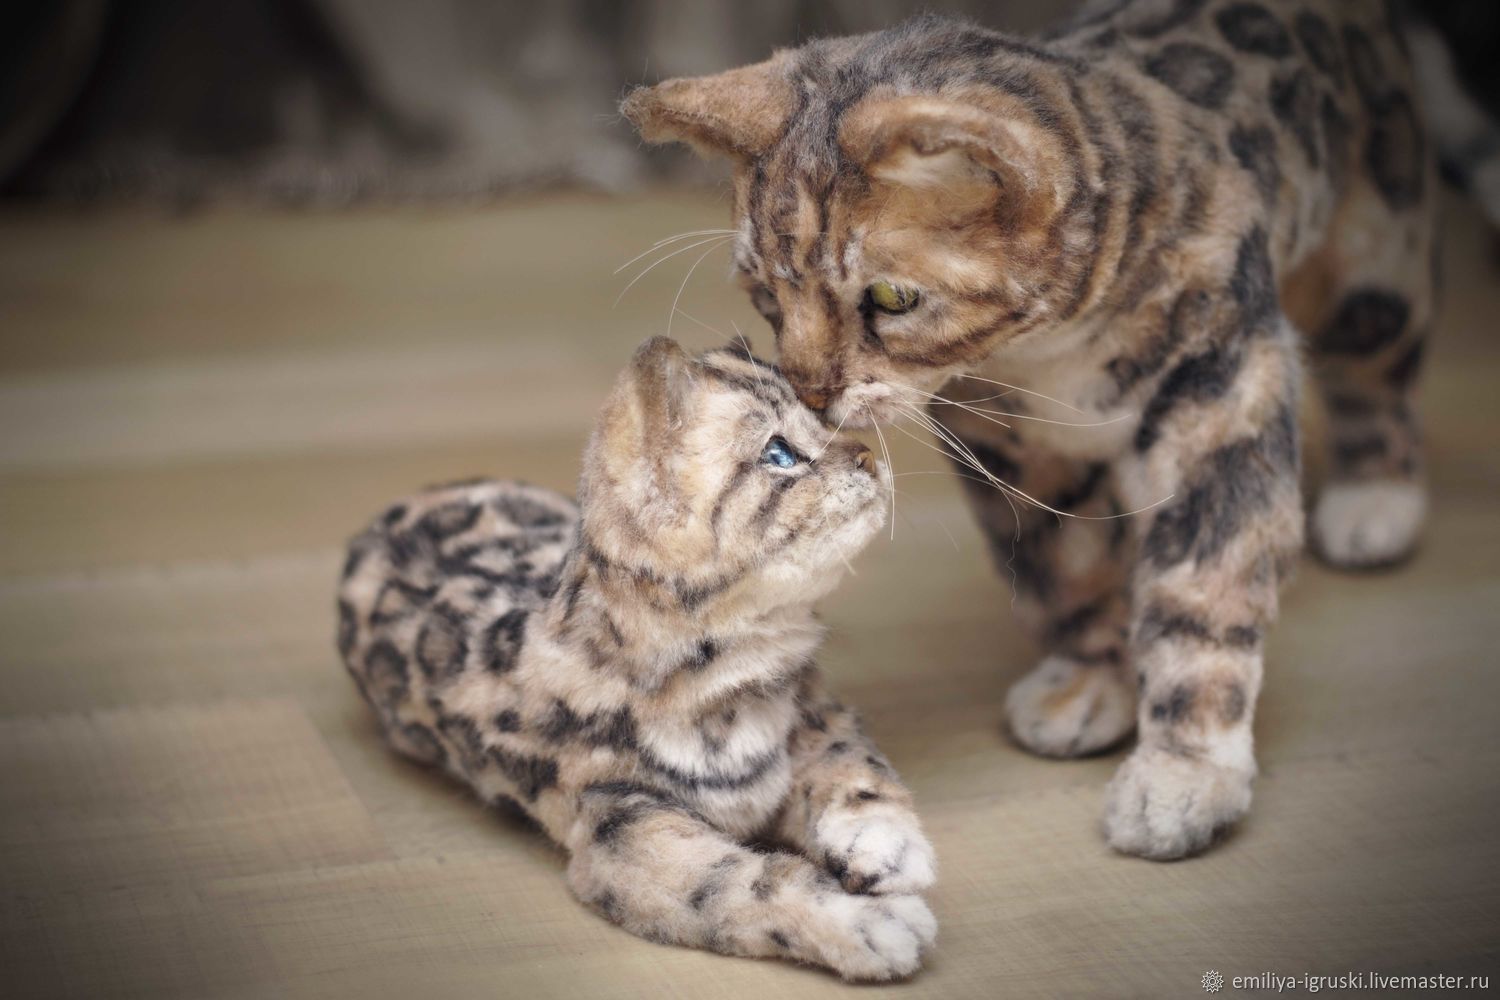 cat stuffed animals that look real